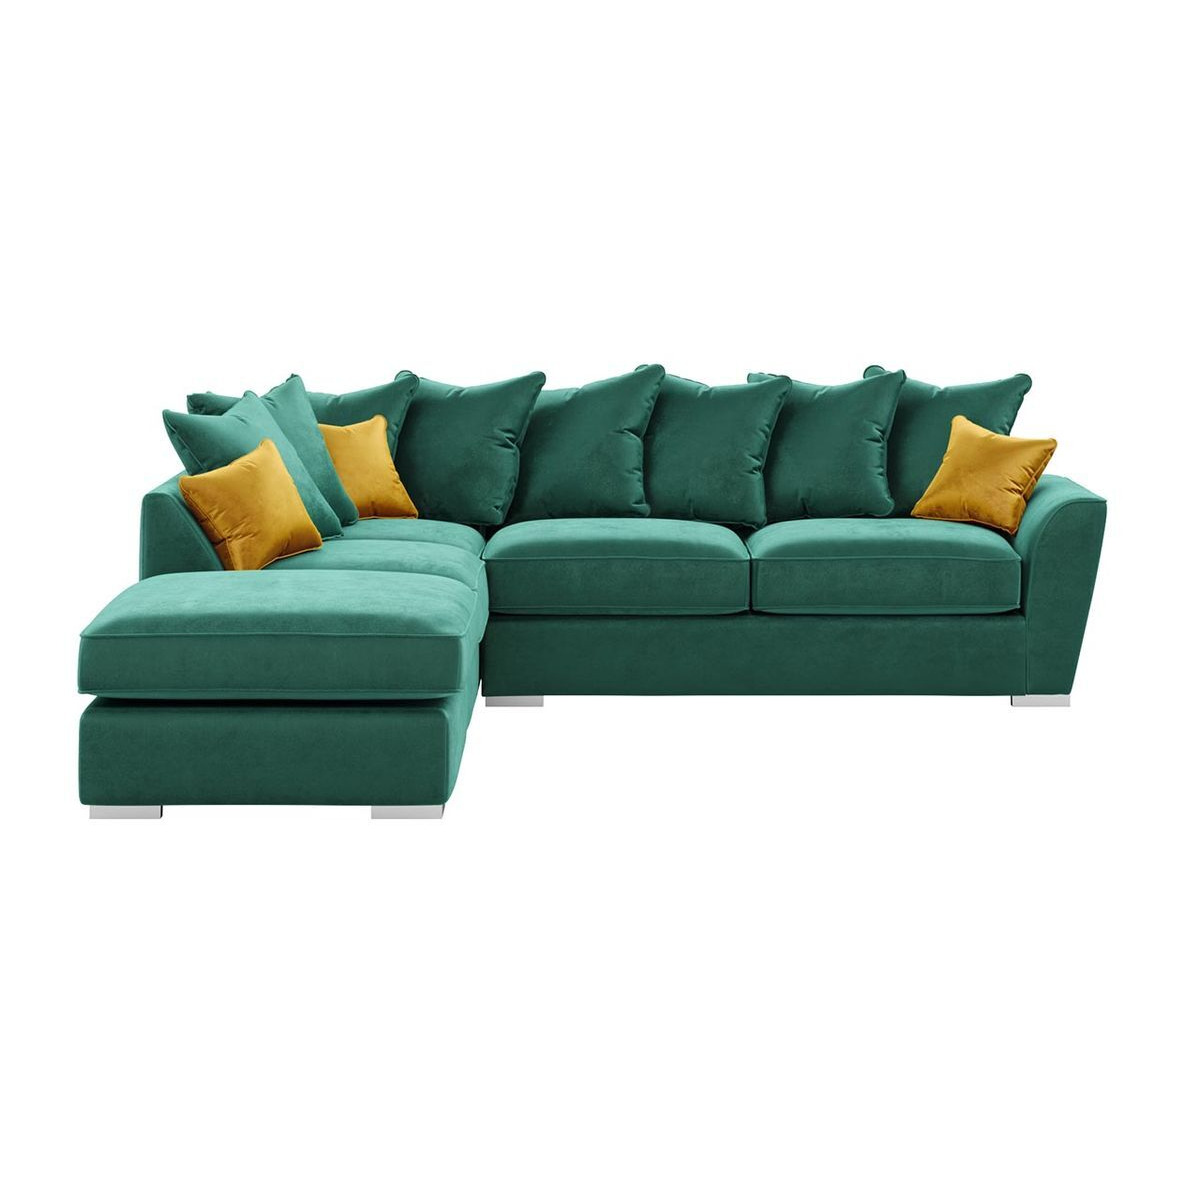 Majestic Left Hand Corner Sofa with Footstool and Loose Back Cushions, dark green/mustard - image 1